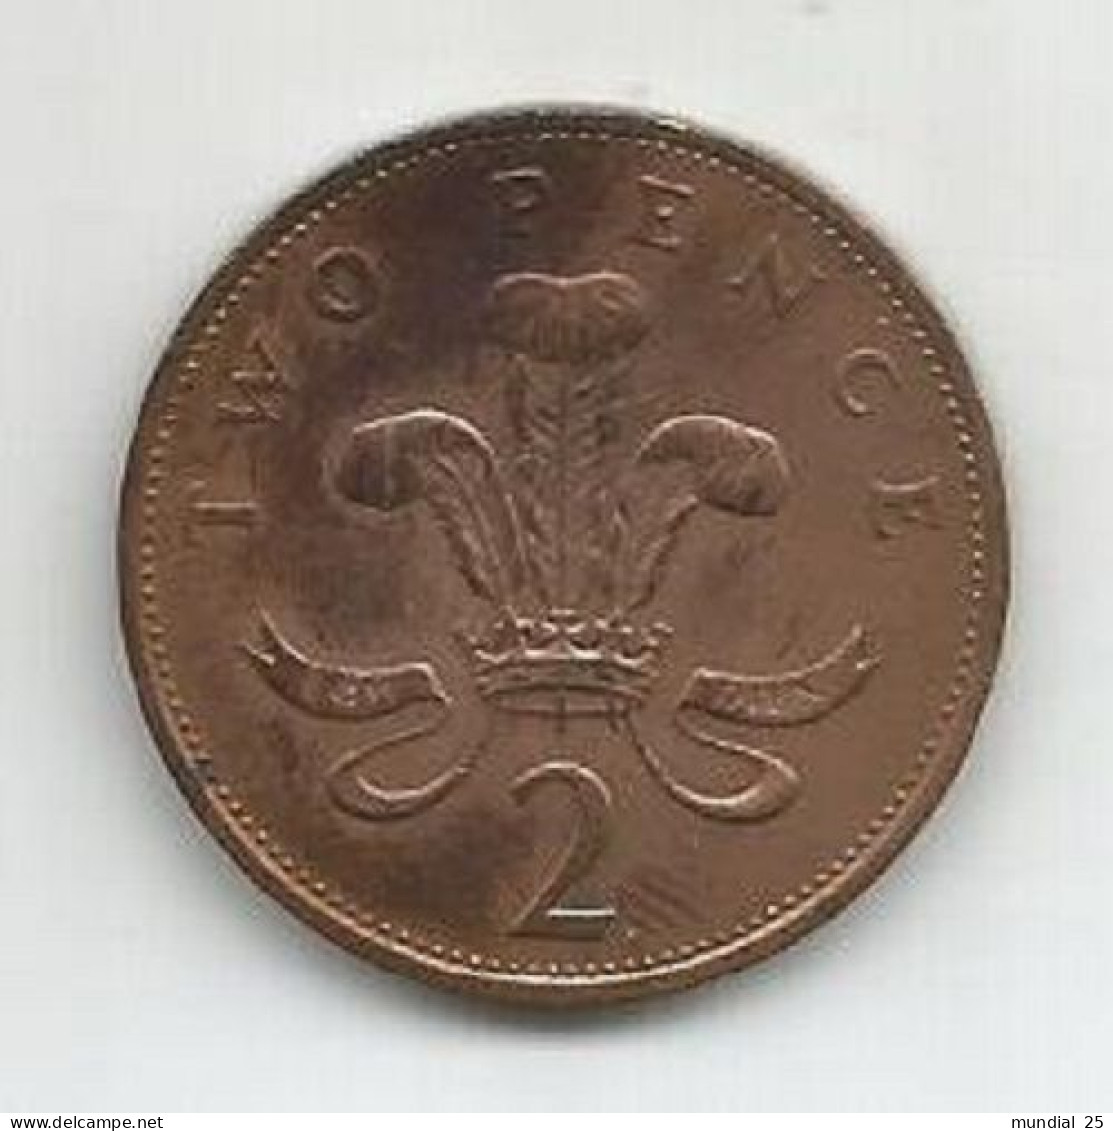 GREAT BRITAIN 2 PENCE 1987 - 2 Pence & 2 New Pence